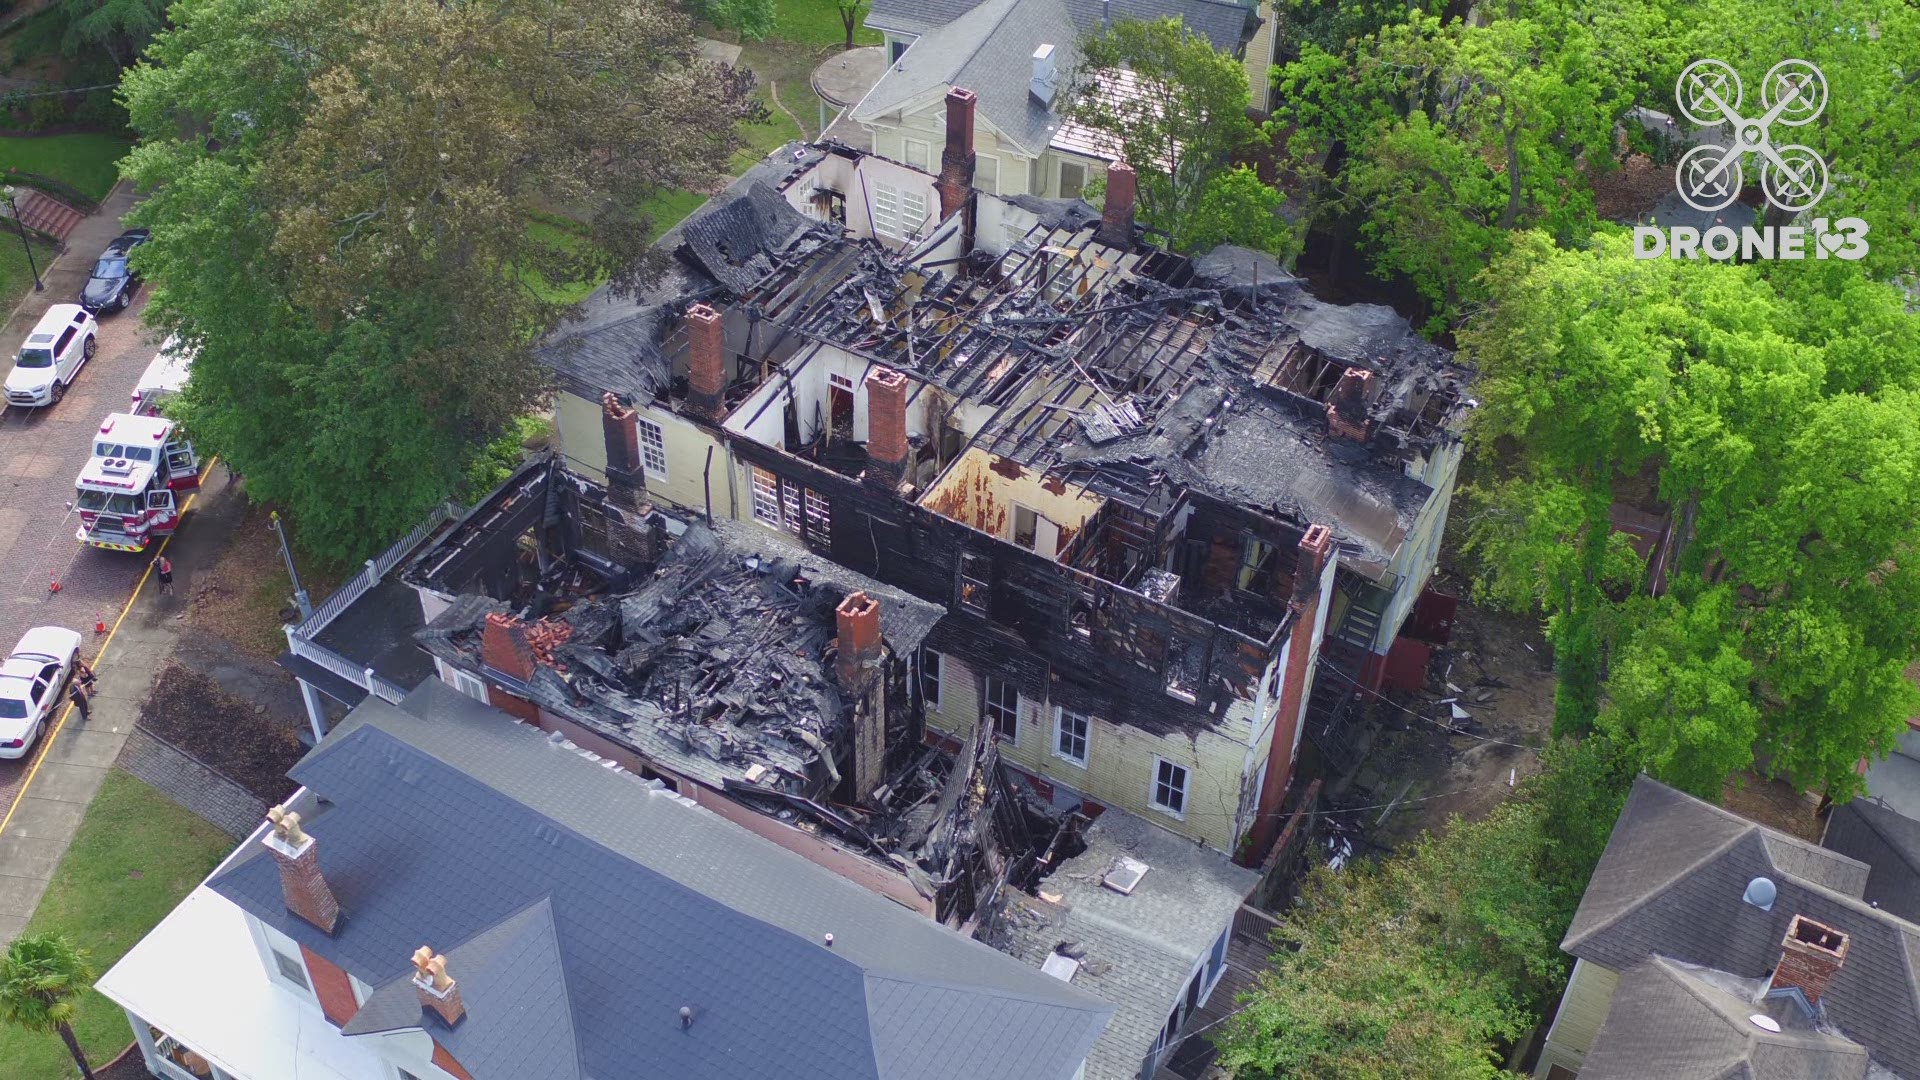 Three homes were damaged in a fire Wednesday night in downtown Macon near Orange and High Streets. The fire injured five firefighters from the Macon-Bibb Fire Department.